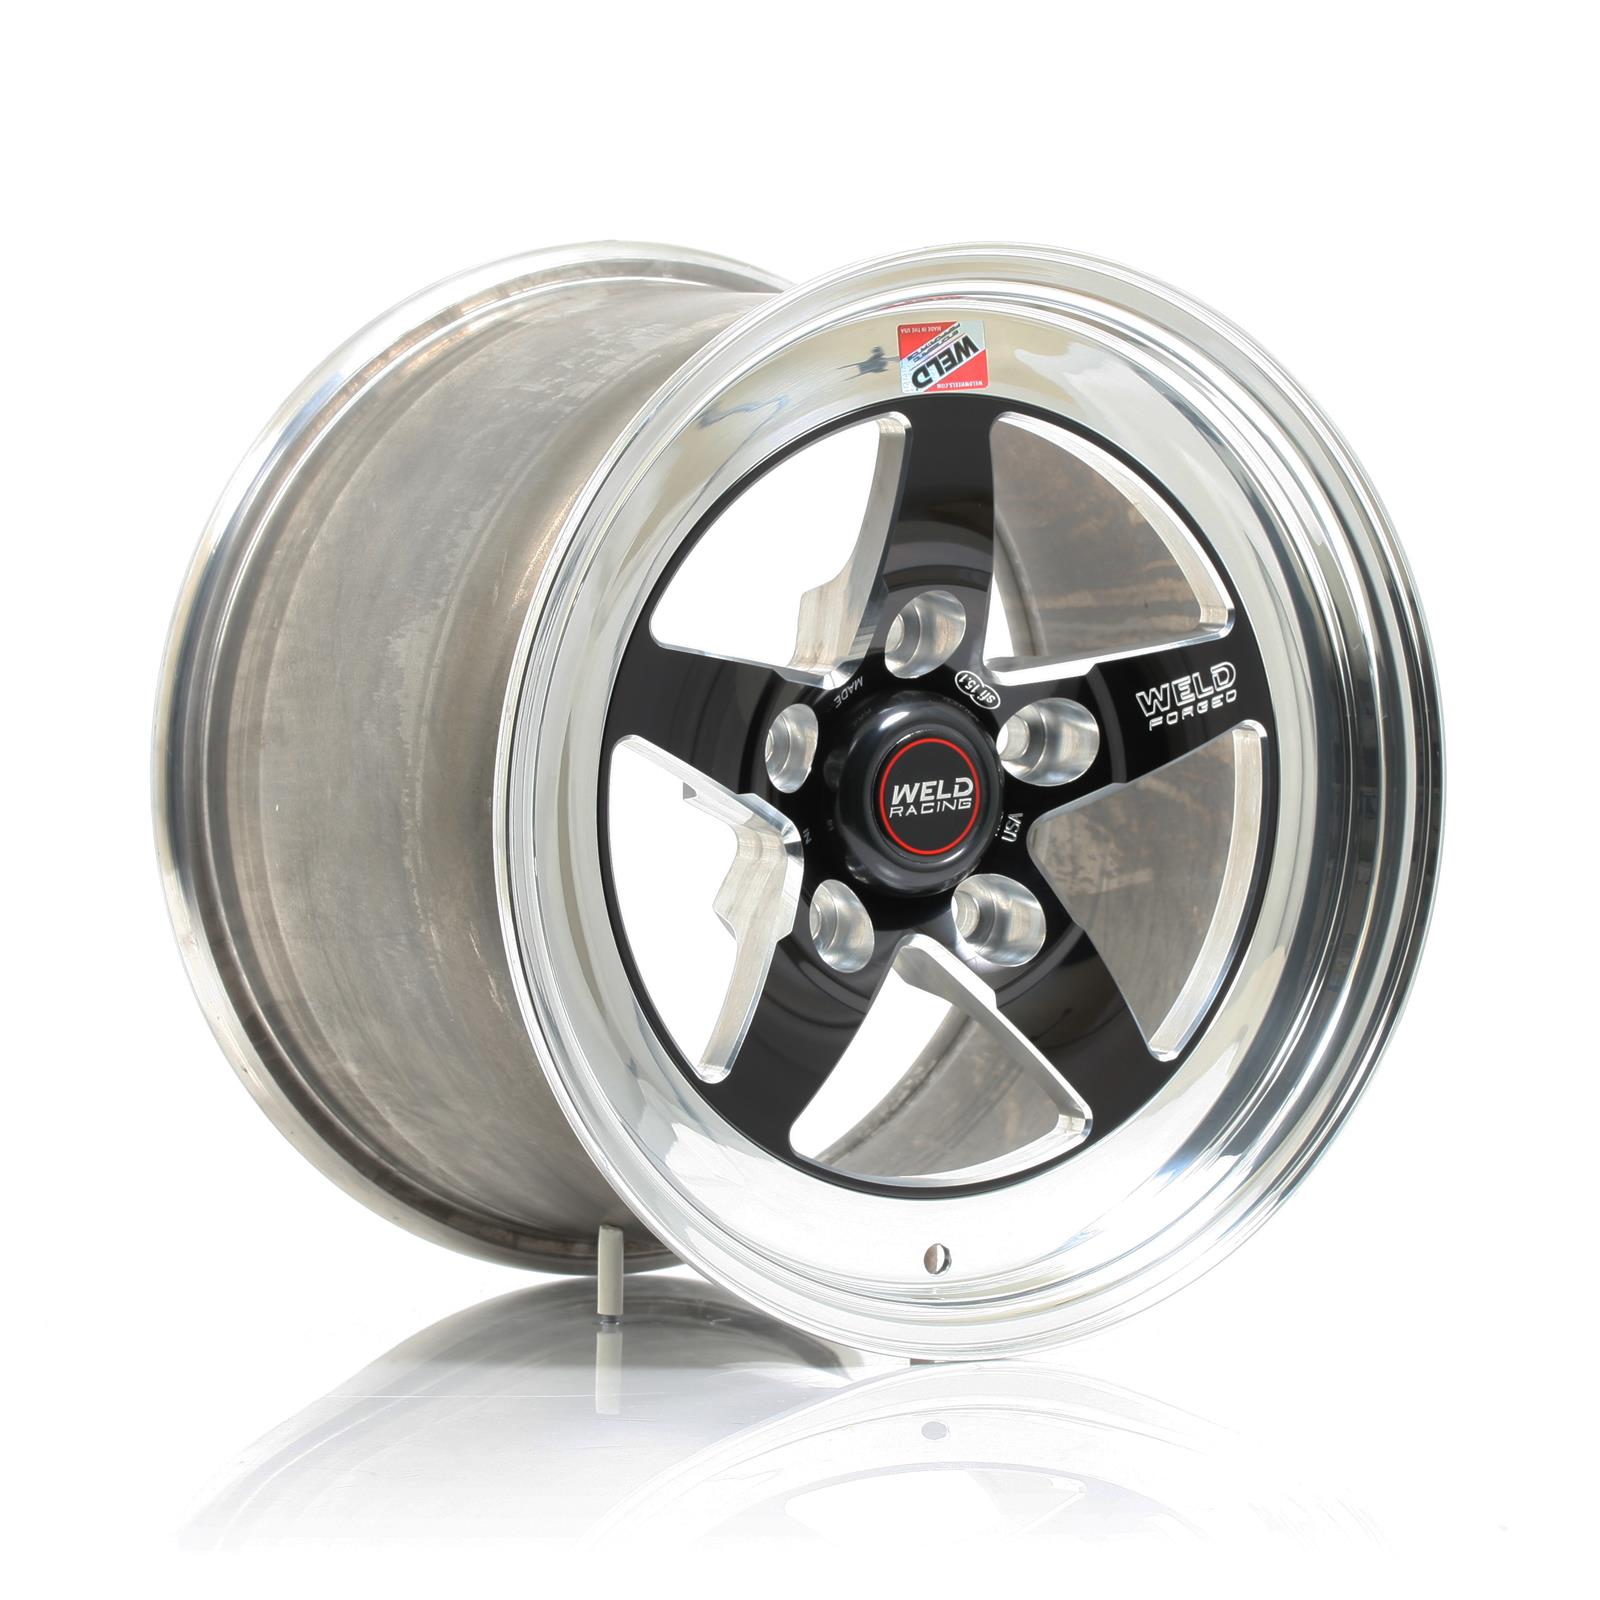 Weld Racing RT-S S71 Forged Aluminum Black Anodized Wheels - 17x9.5" w/7.3" Back Spacing